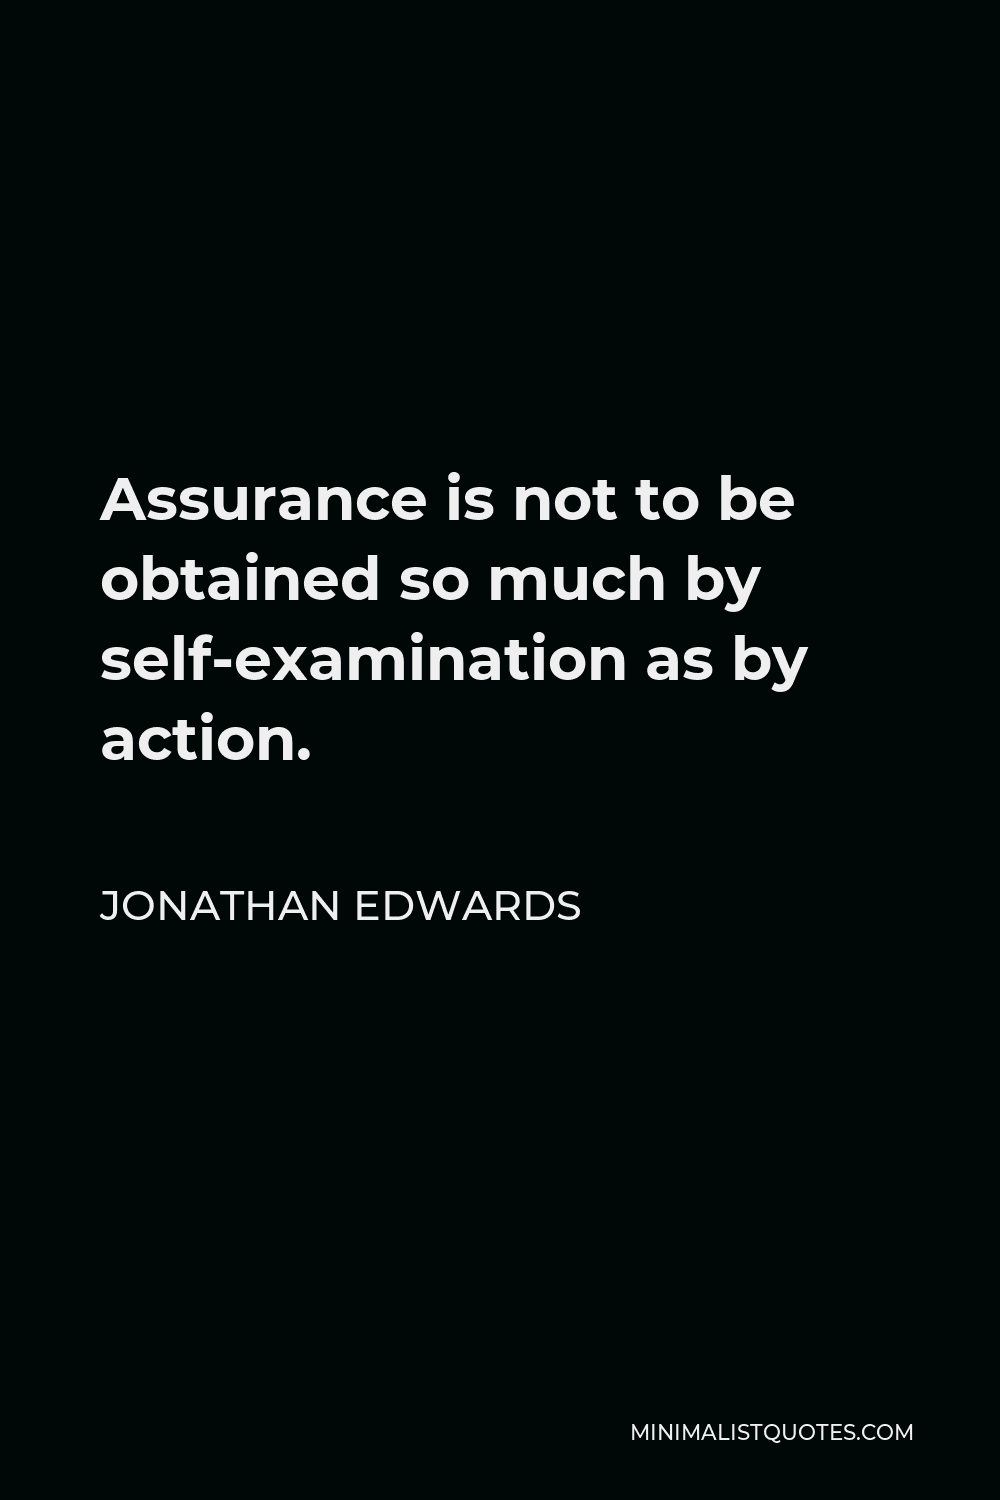 Jonathan Edwards Quote - Assurance is not to be obtained so much by self-examination as by action.